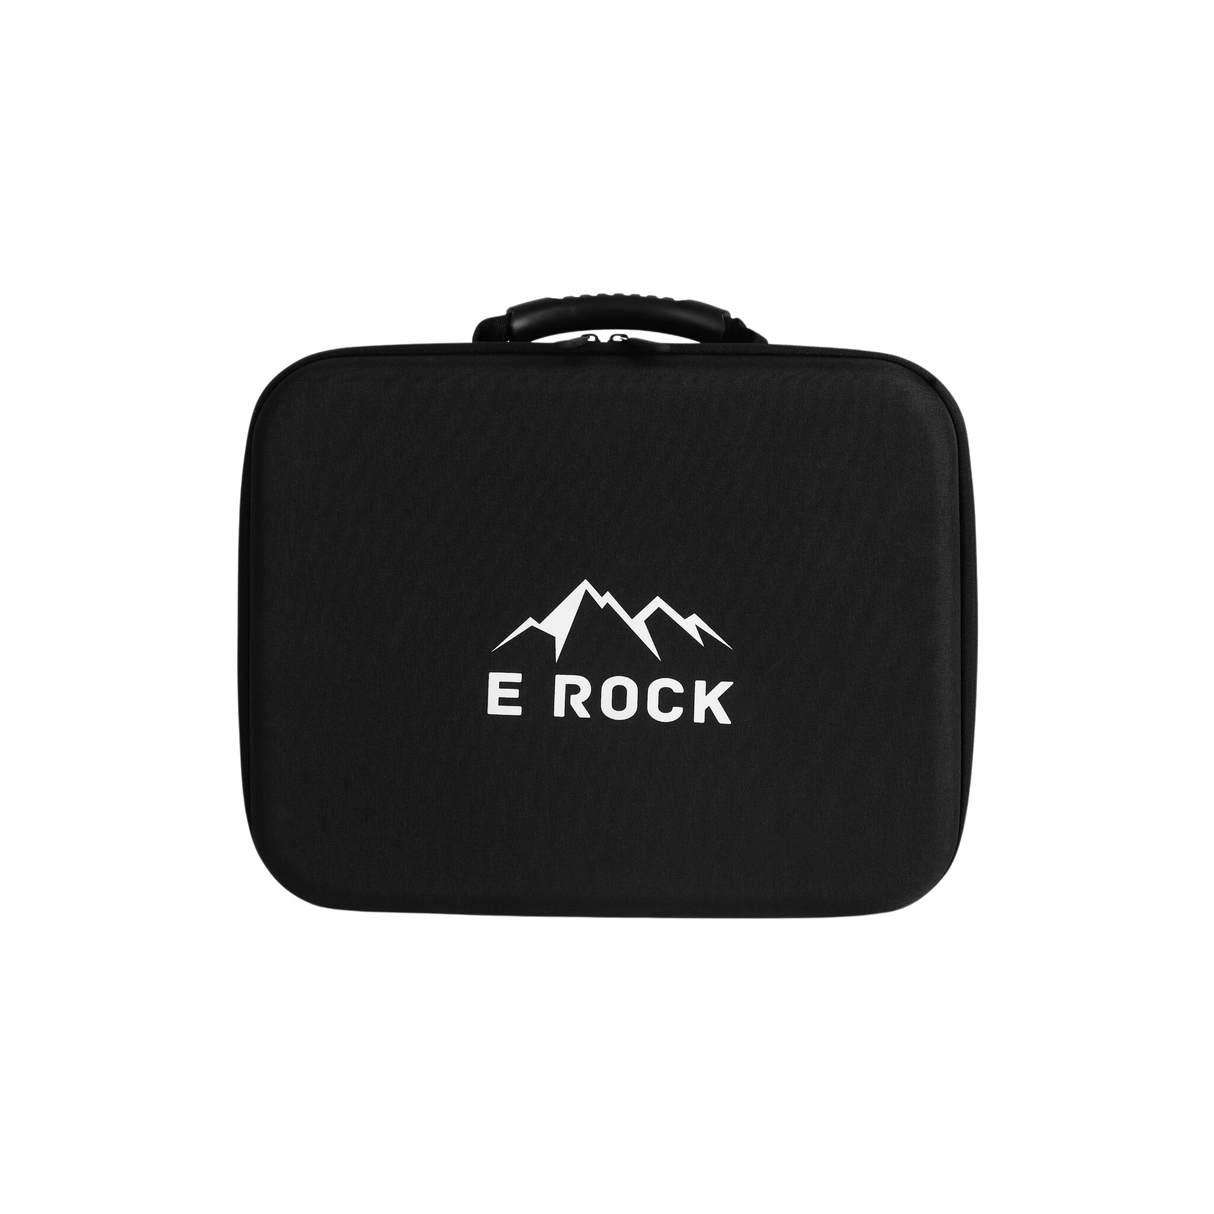 Erock Pro storage bag charging cable or mobile charger